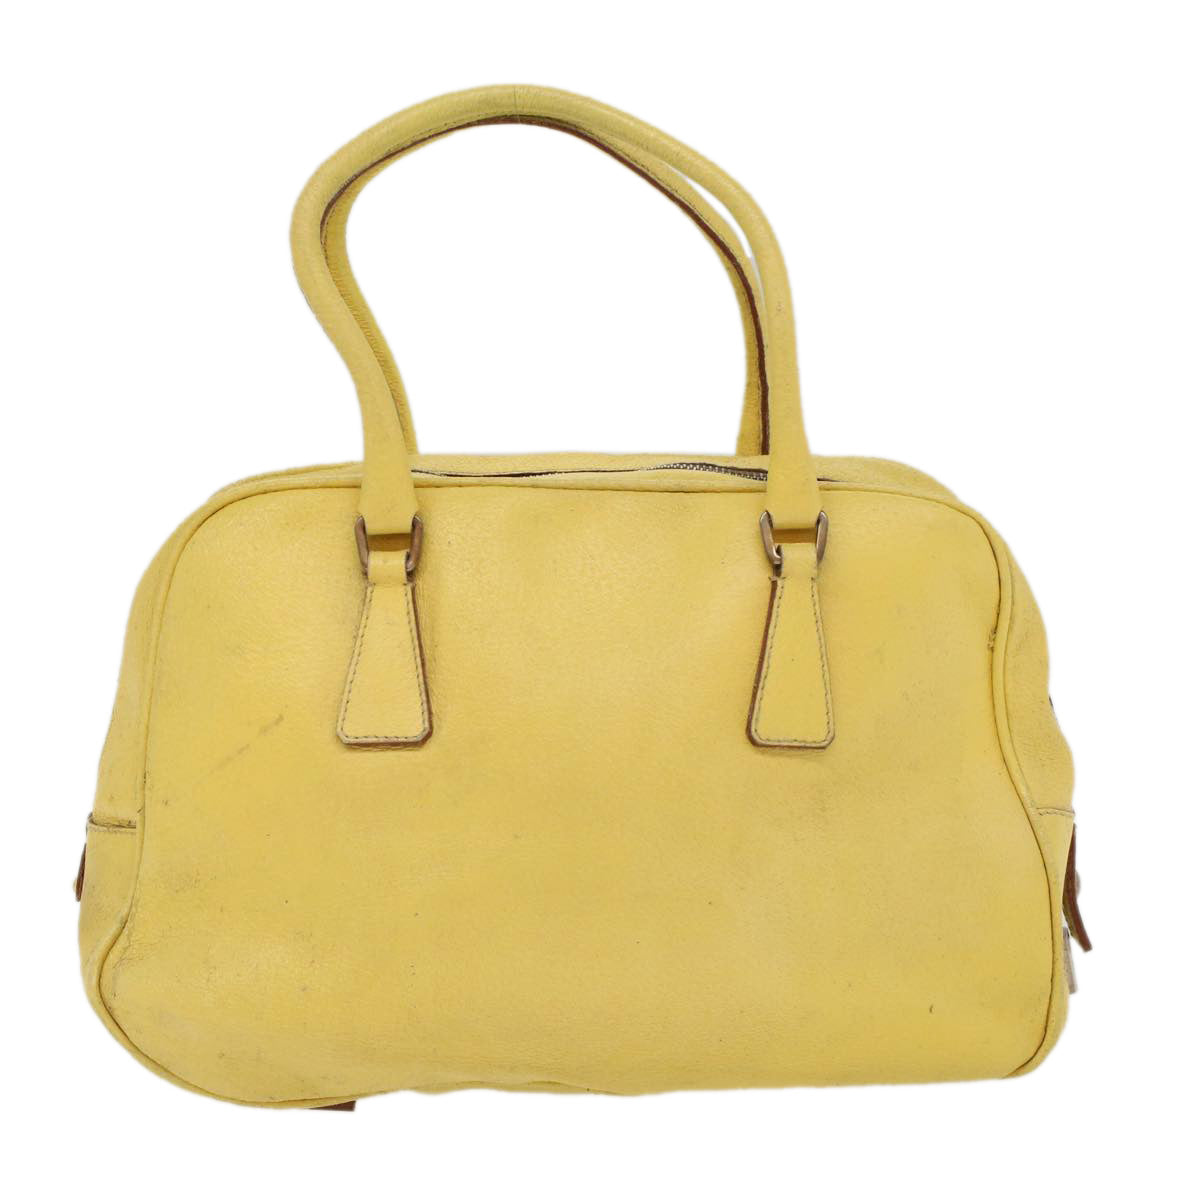 PRADA Hand Bag Leather Yellow Auth cl744 - 0